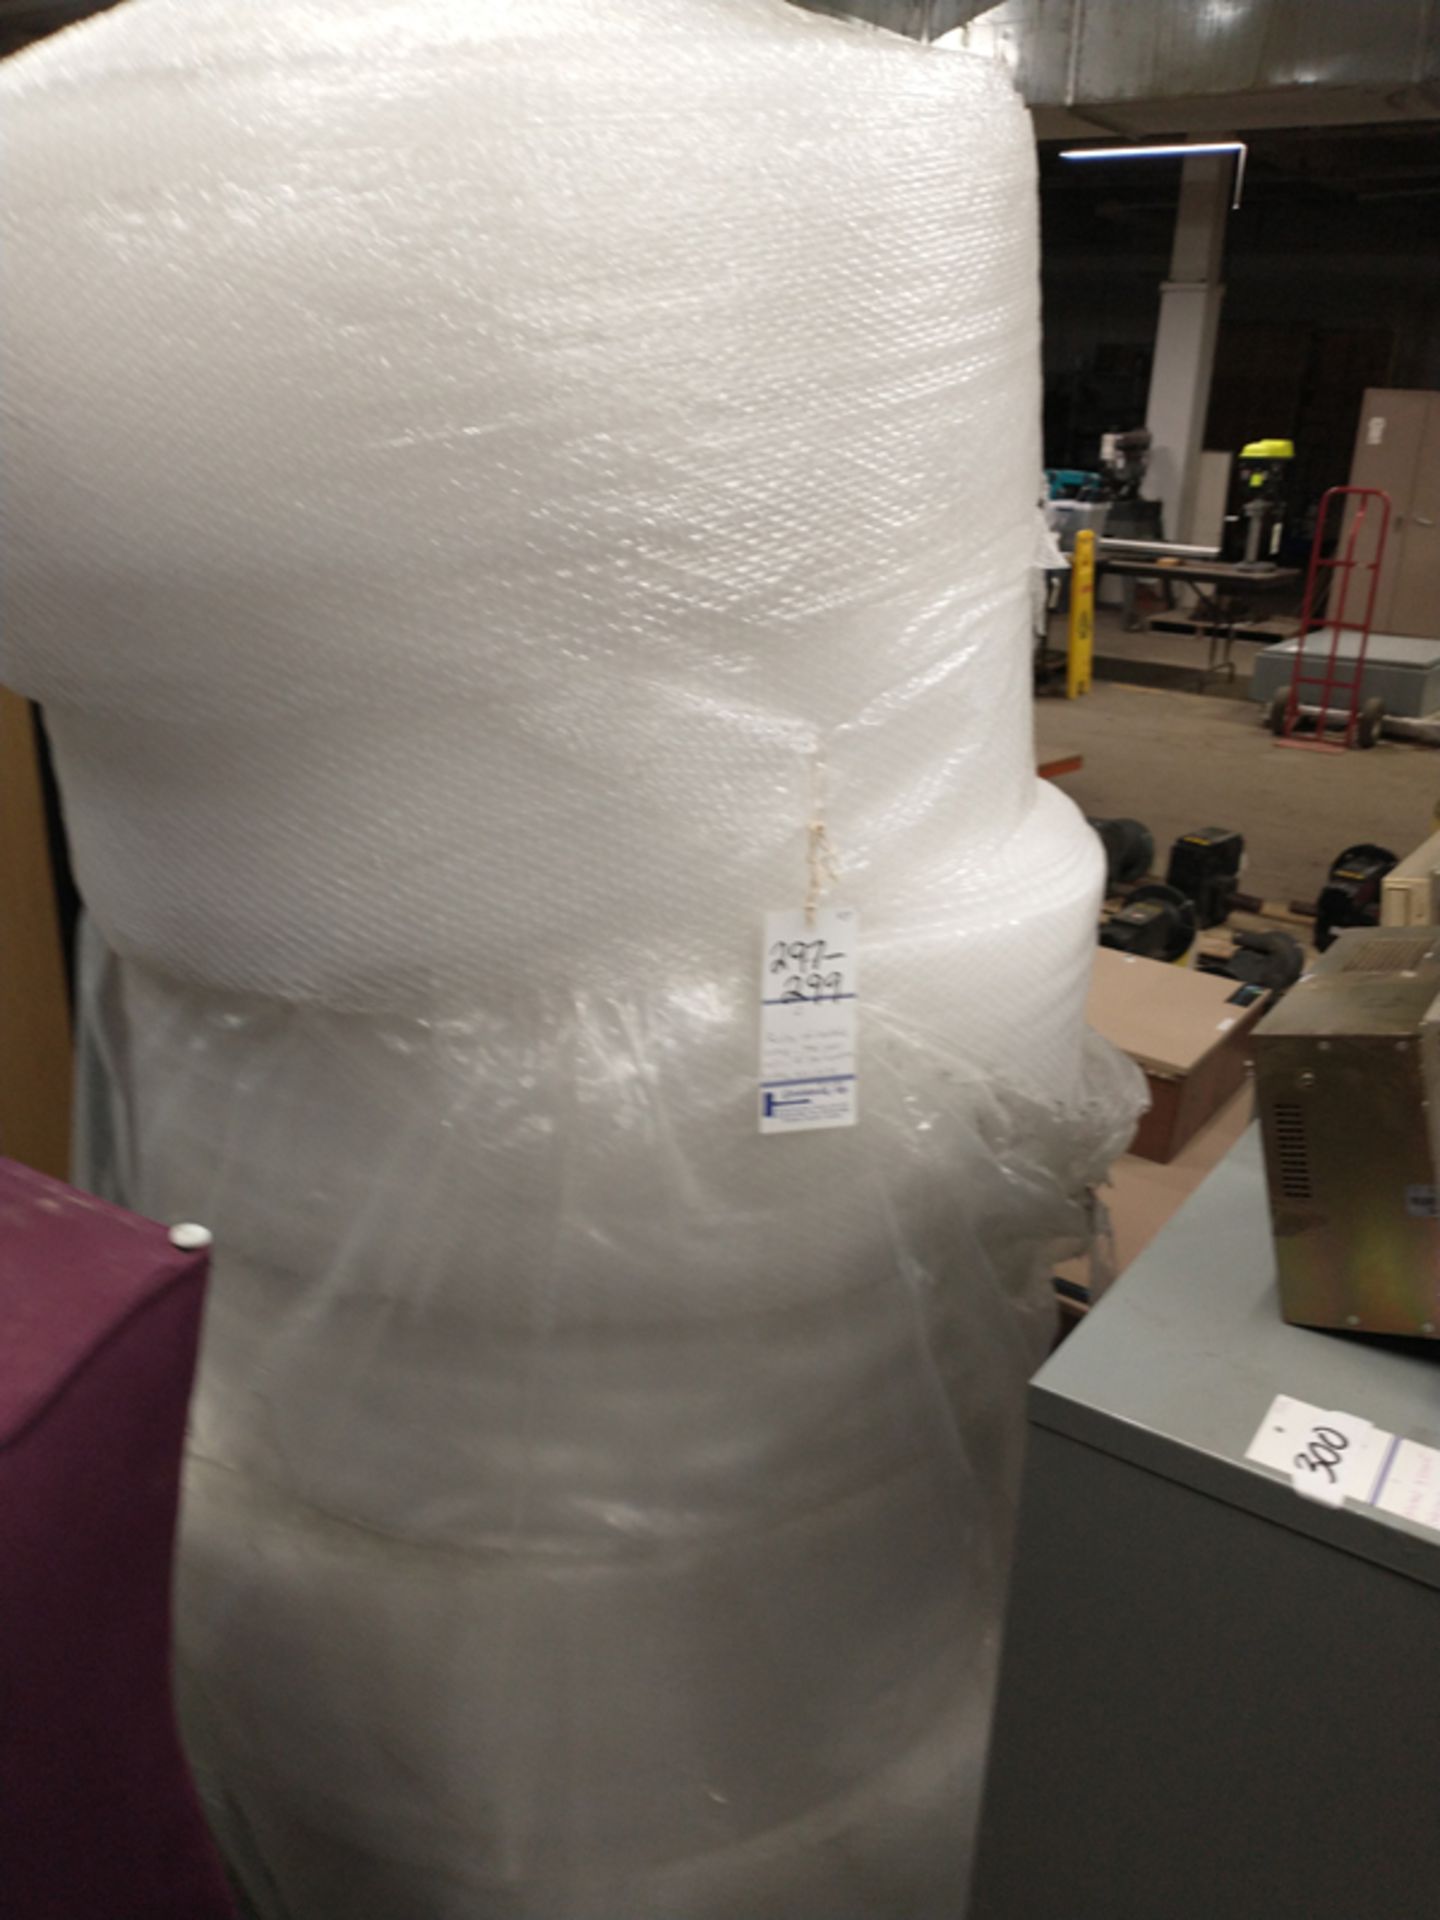 2 ROLLS OF BUBBLE WRAP -EACH ROLLS IS 750' X 12" PERFORATED - SIDES OF THE ROLL ARE DIRTY - Image 2 of 2